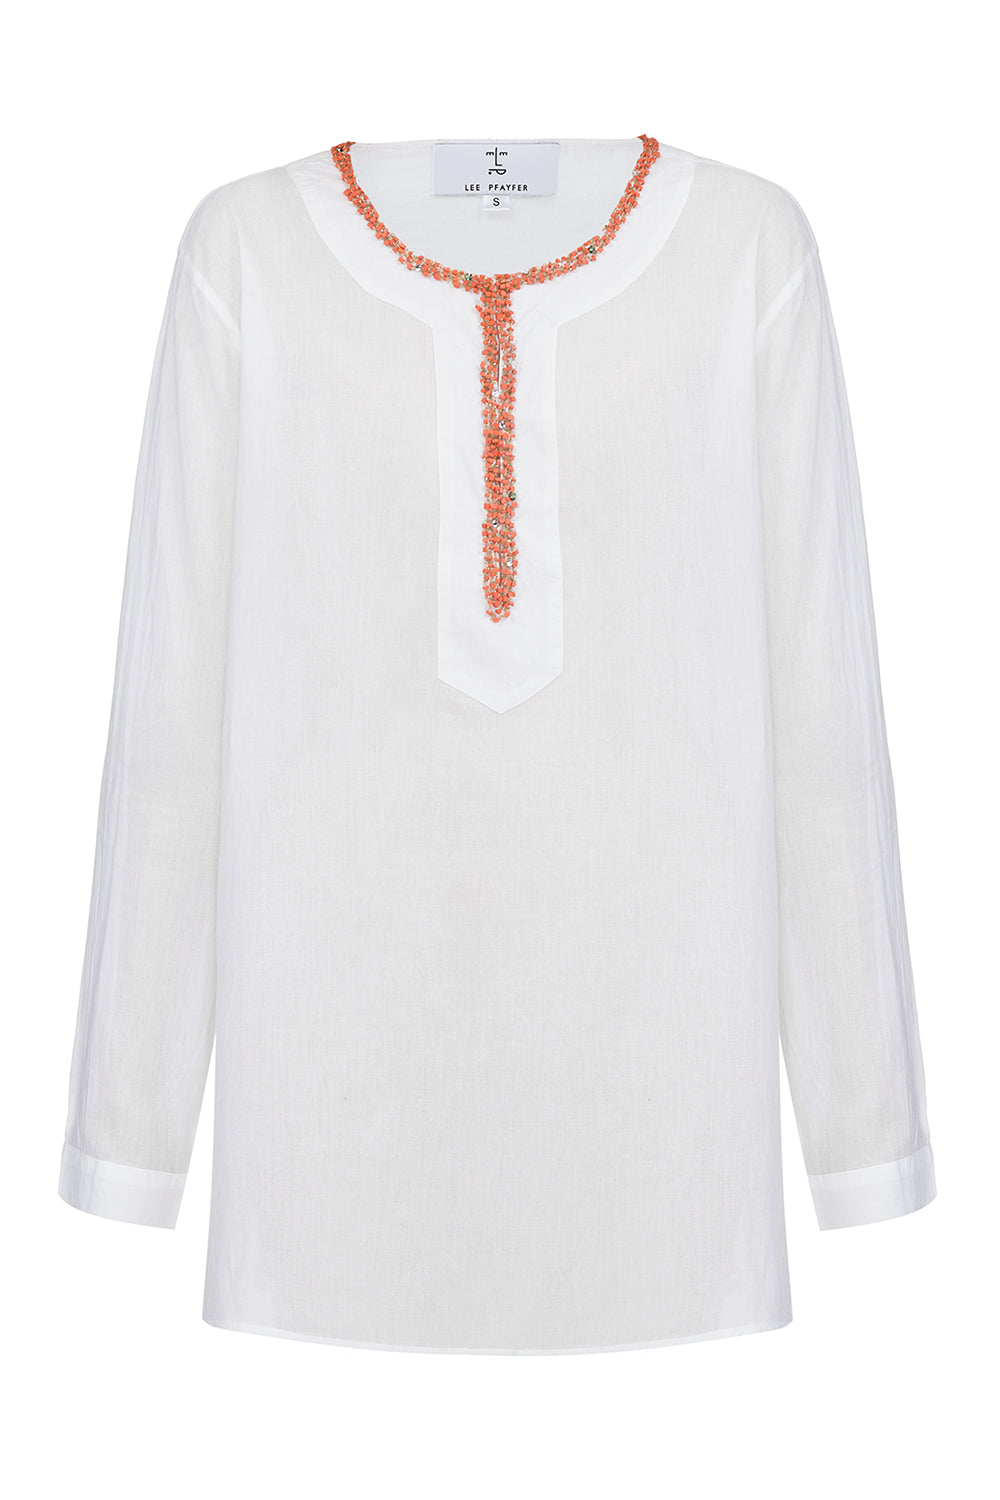 Divine white cotton tunic with long sleeves